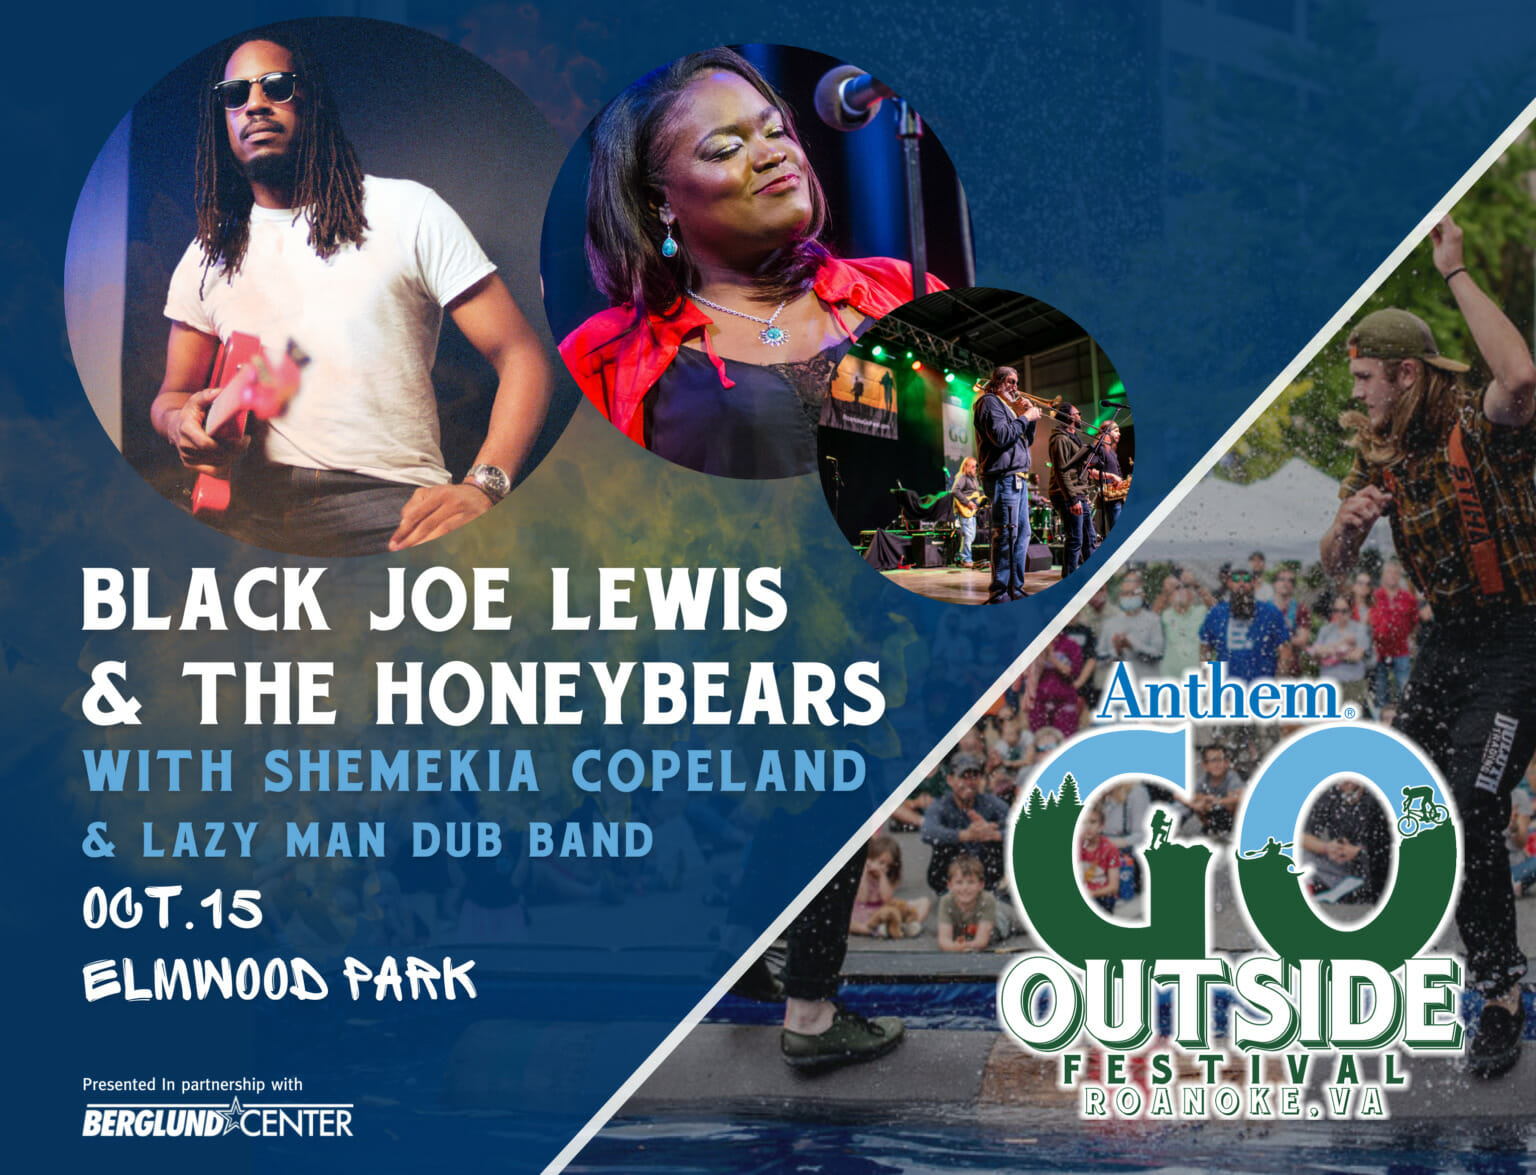 GO Fest 2022 Announcement with Black Joe Lewis and Shemekia Copeland